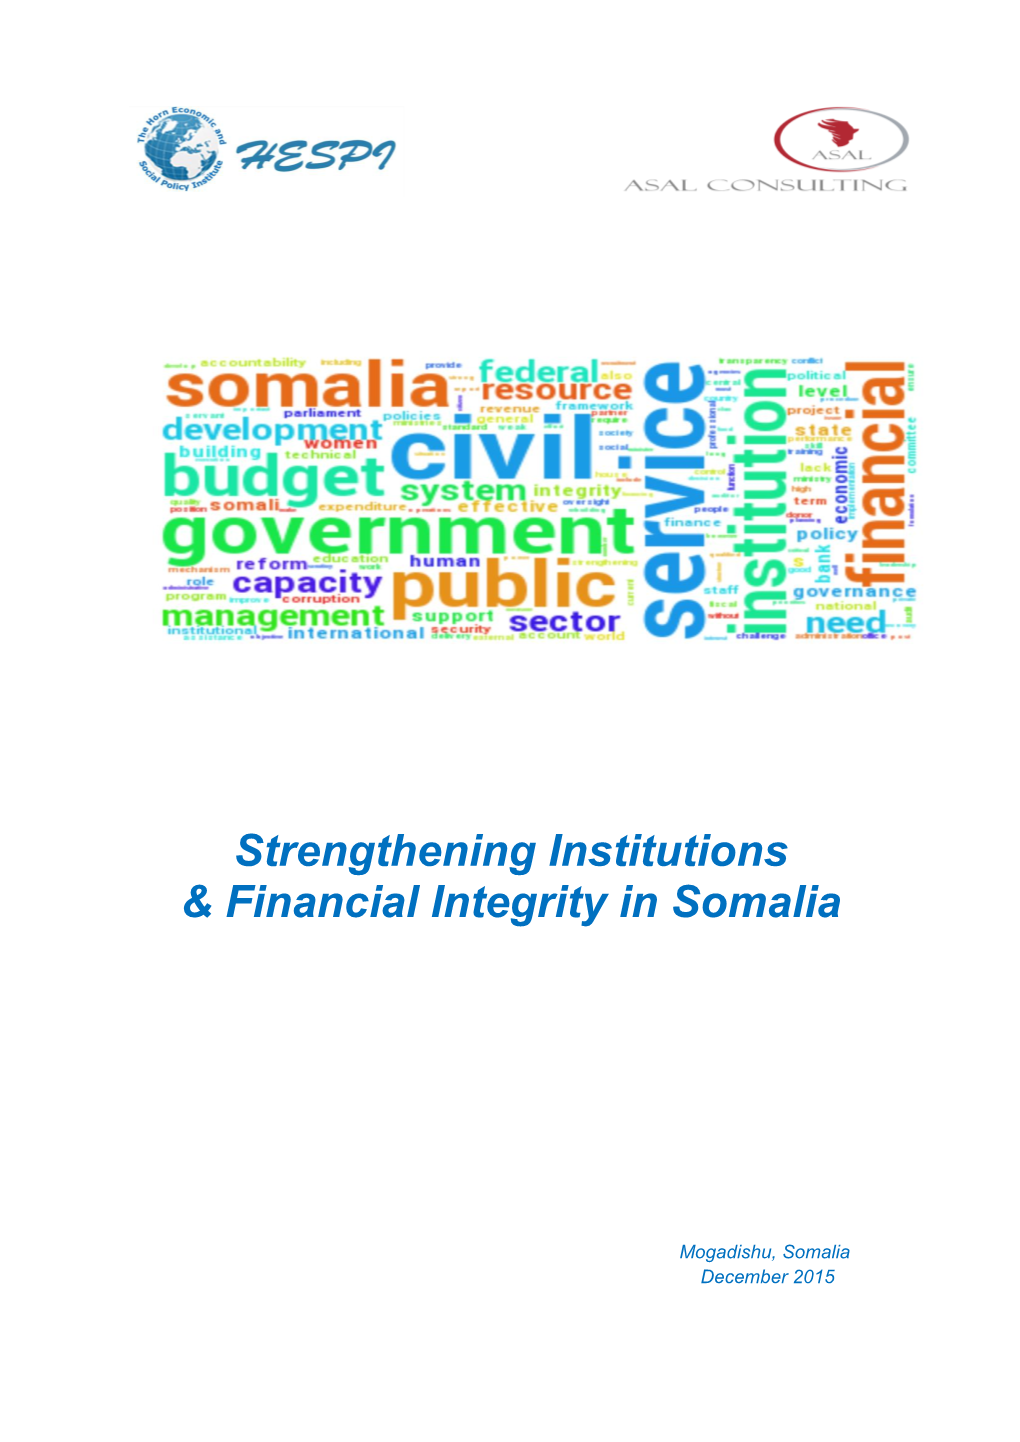 Strengthening Institutions & Financial Integrity in Somalia